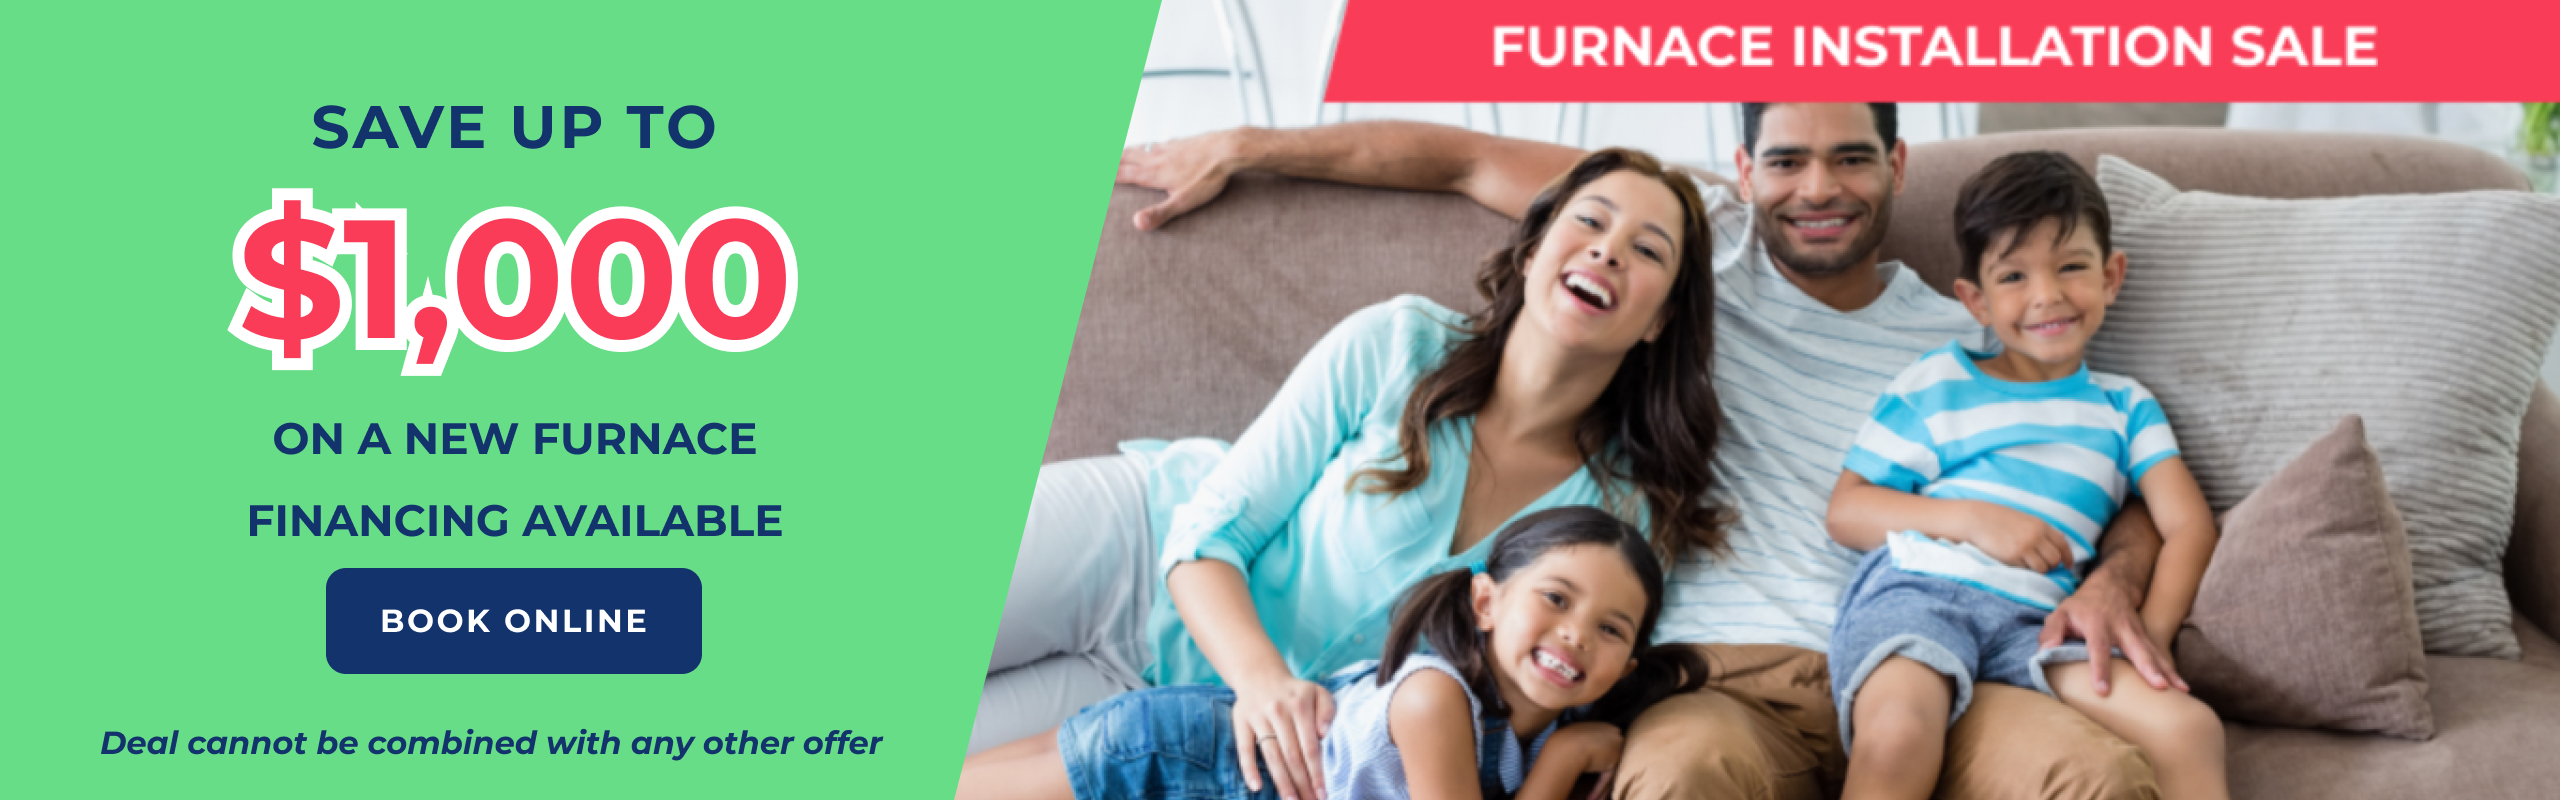 Furnace Installation Beamsville, save up to $1000 on new furnace